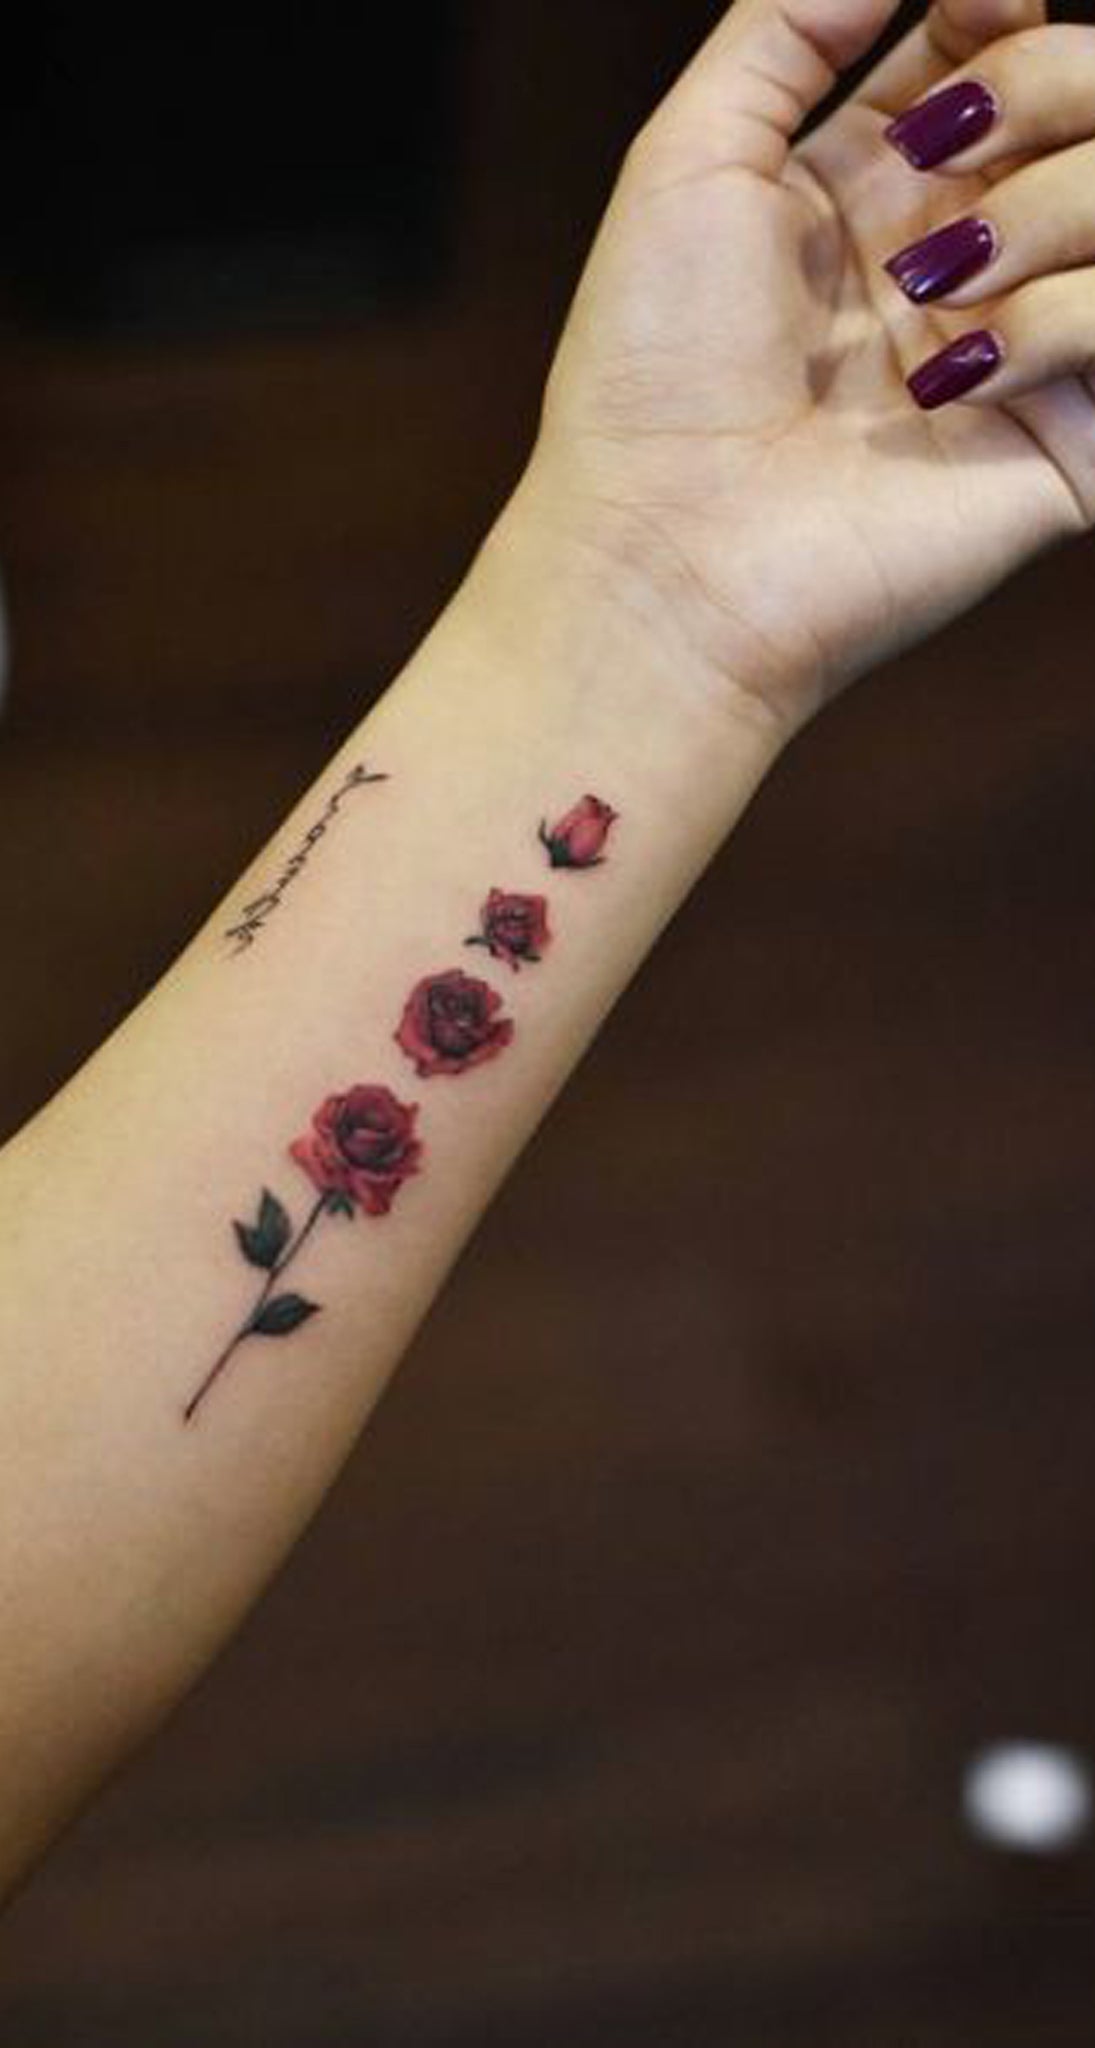 Unique Rose Arm Tattoo Ideas for Teenagers - Cool Special Floral Flower Watercolor Forearm Tat - www.MyBodiArt.com #tattoos